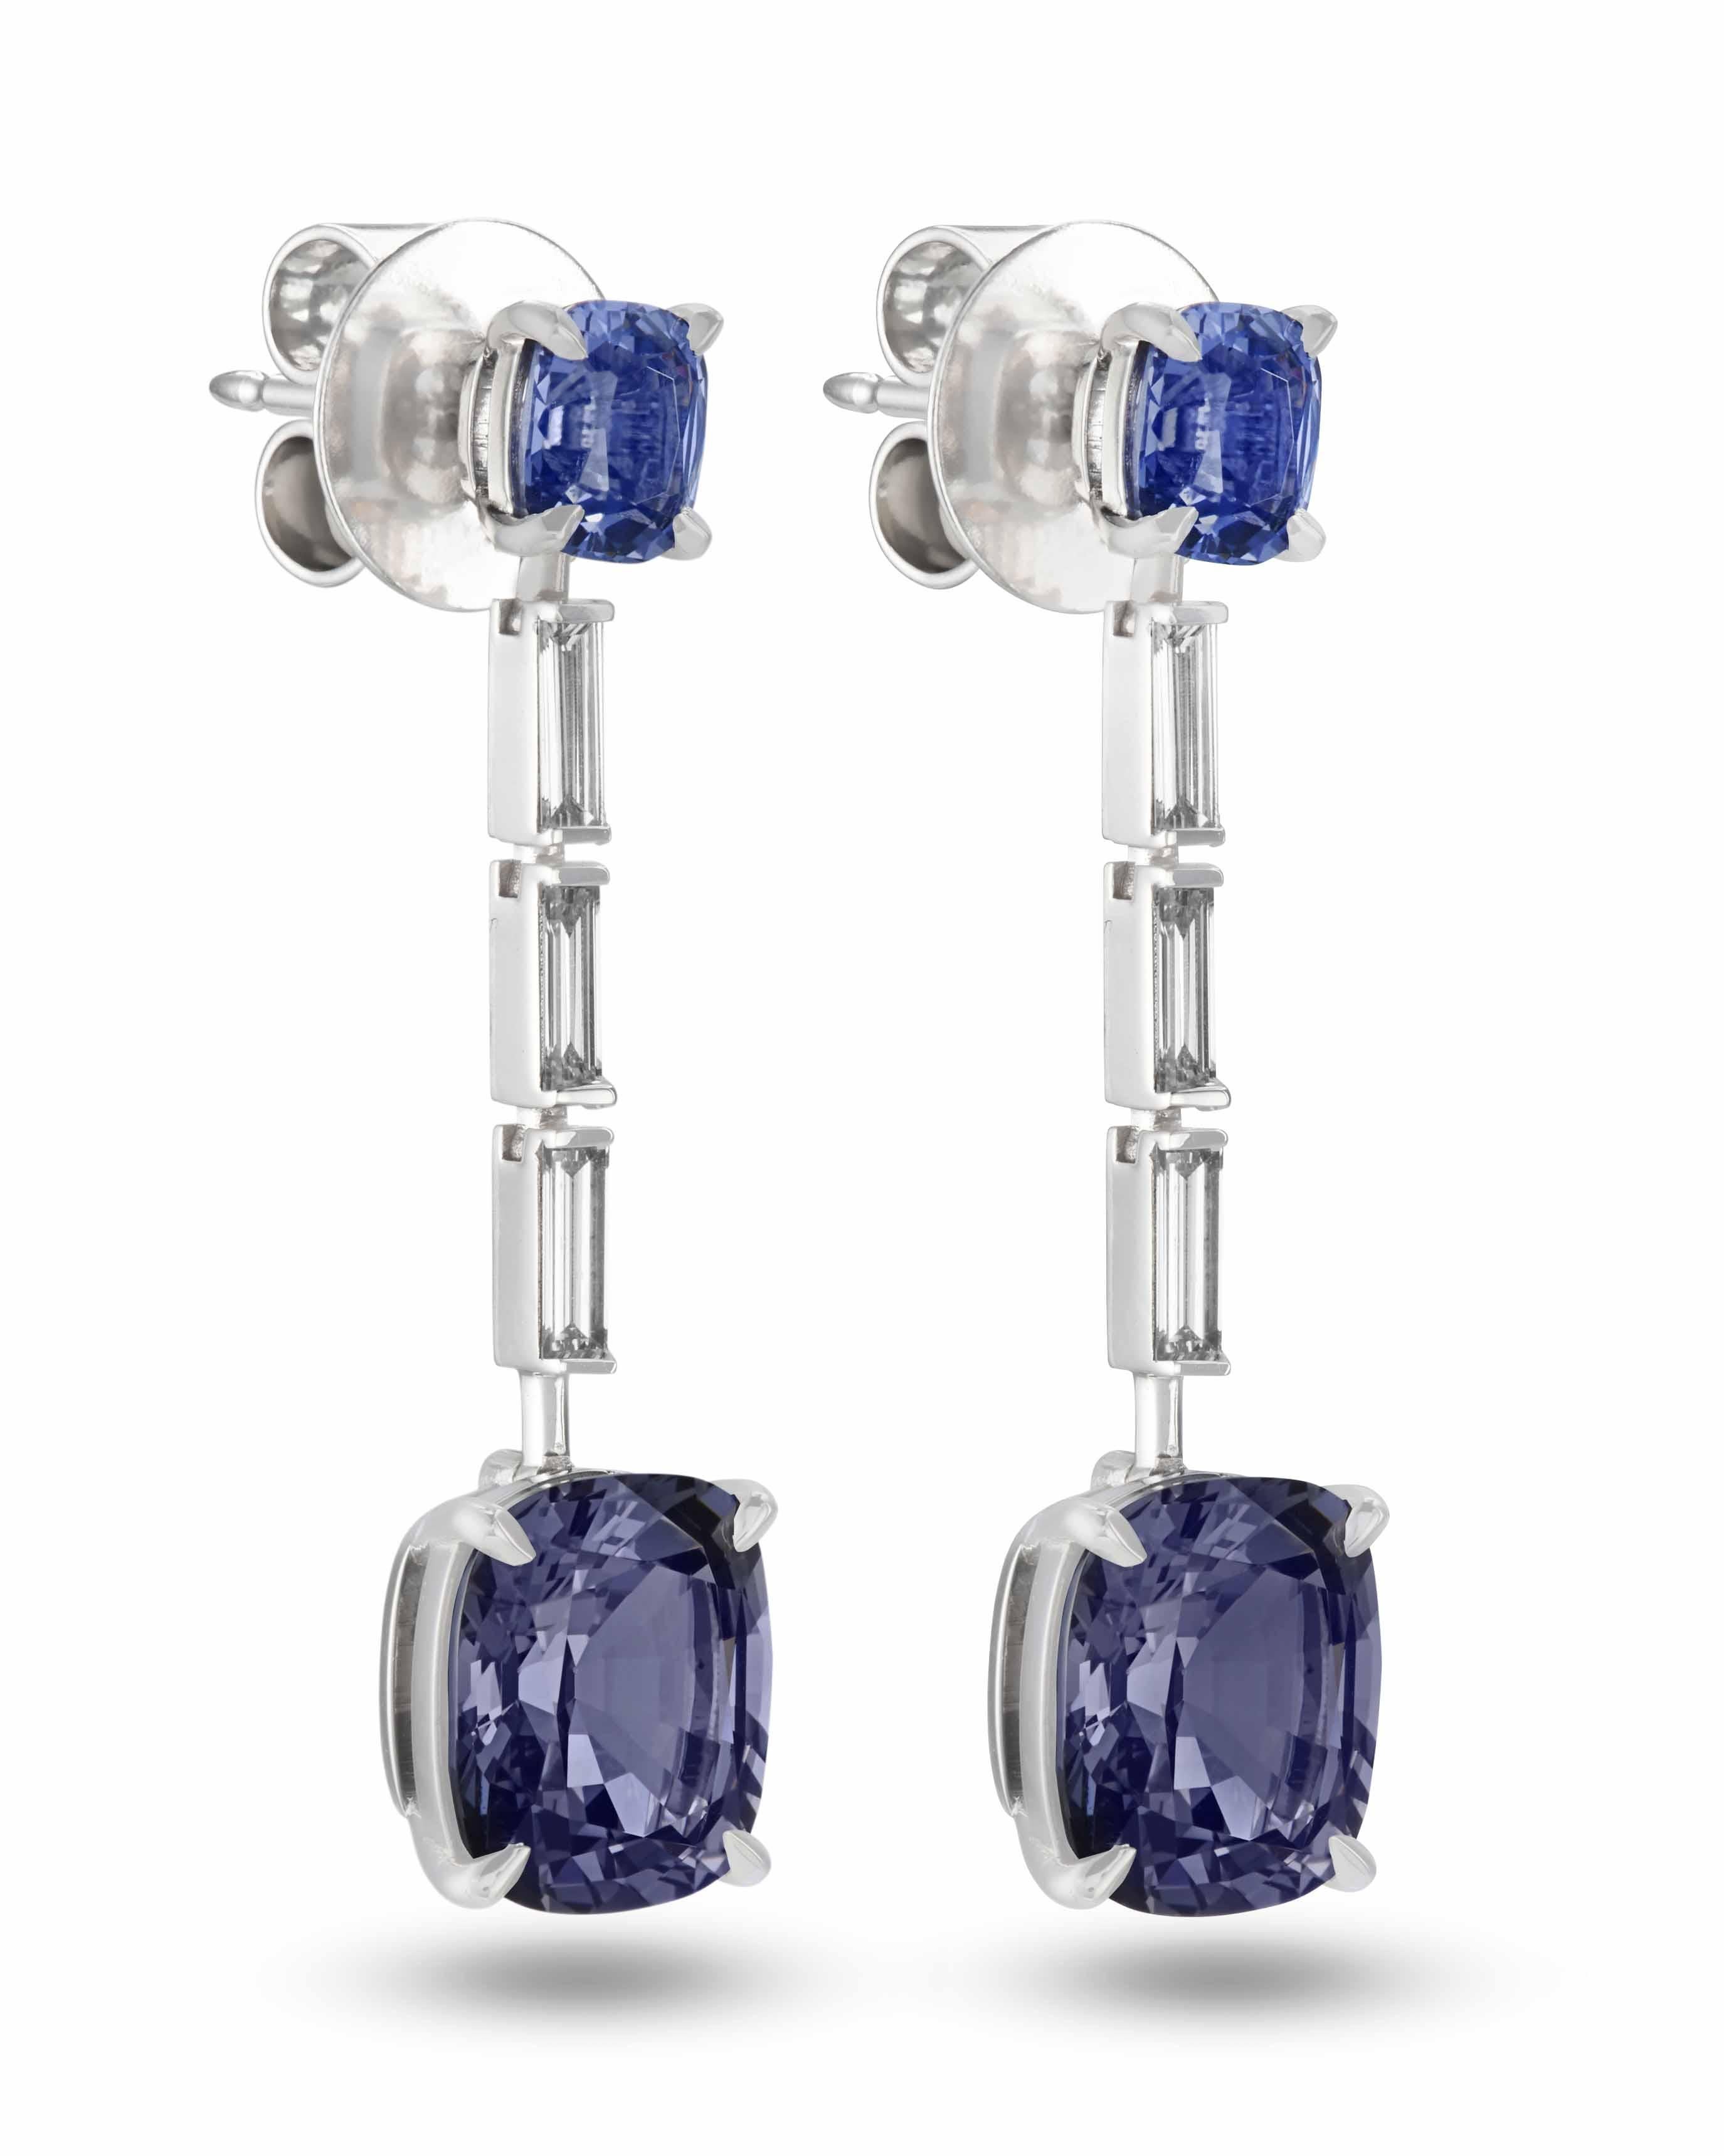 Elegant drop earrings with Burmese spinels and diamonds. This pair is perfect for everyday wear as well as special occasions. Each earring contains a cushion-cut blue-gray spinel followed by three F VS diamond baguettes and a larger grey-violet